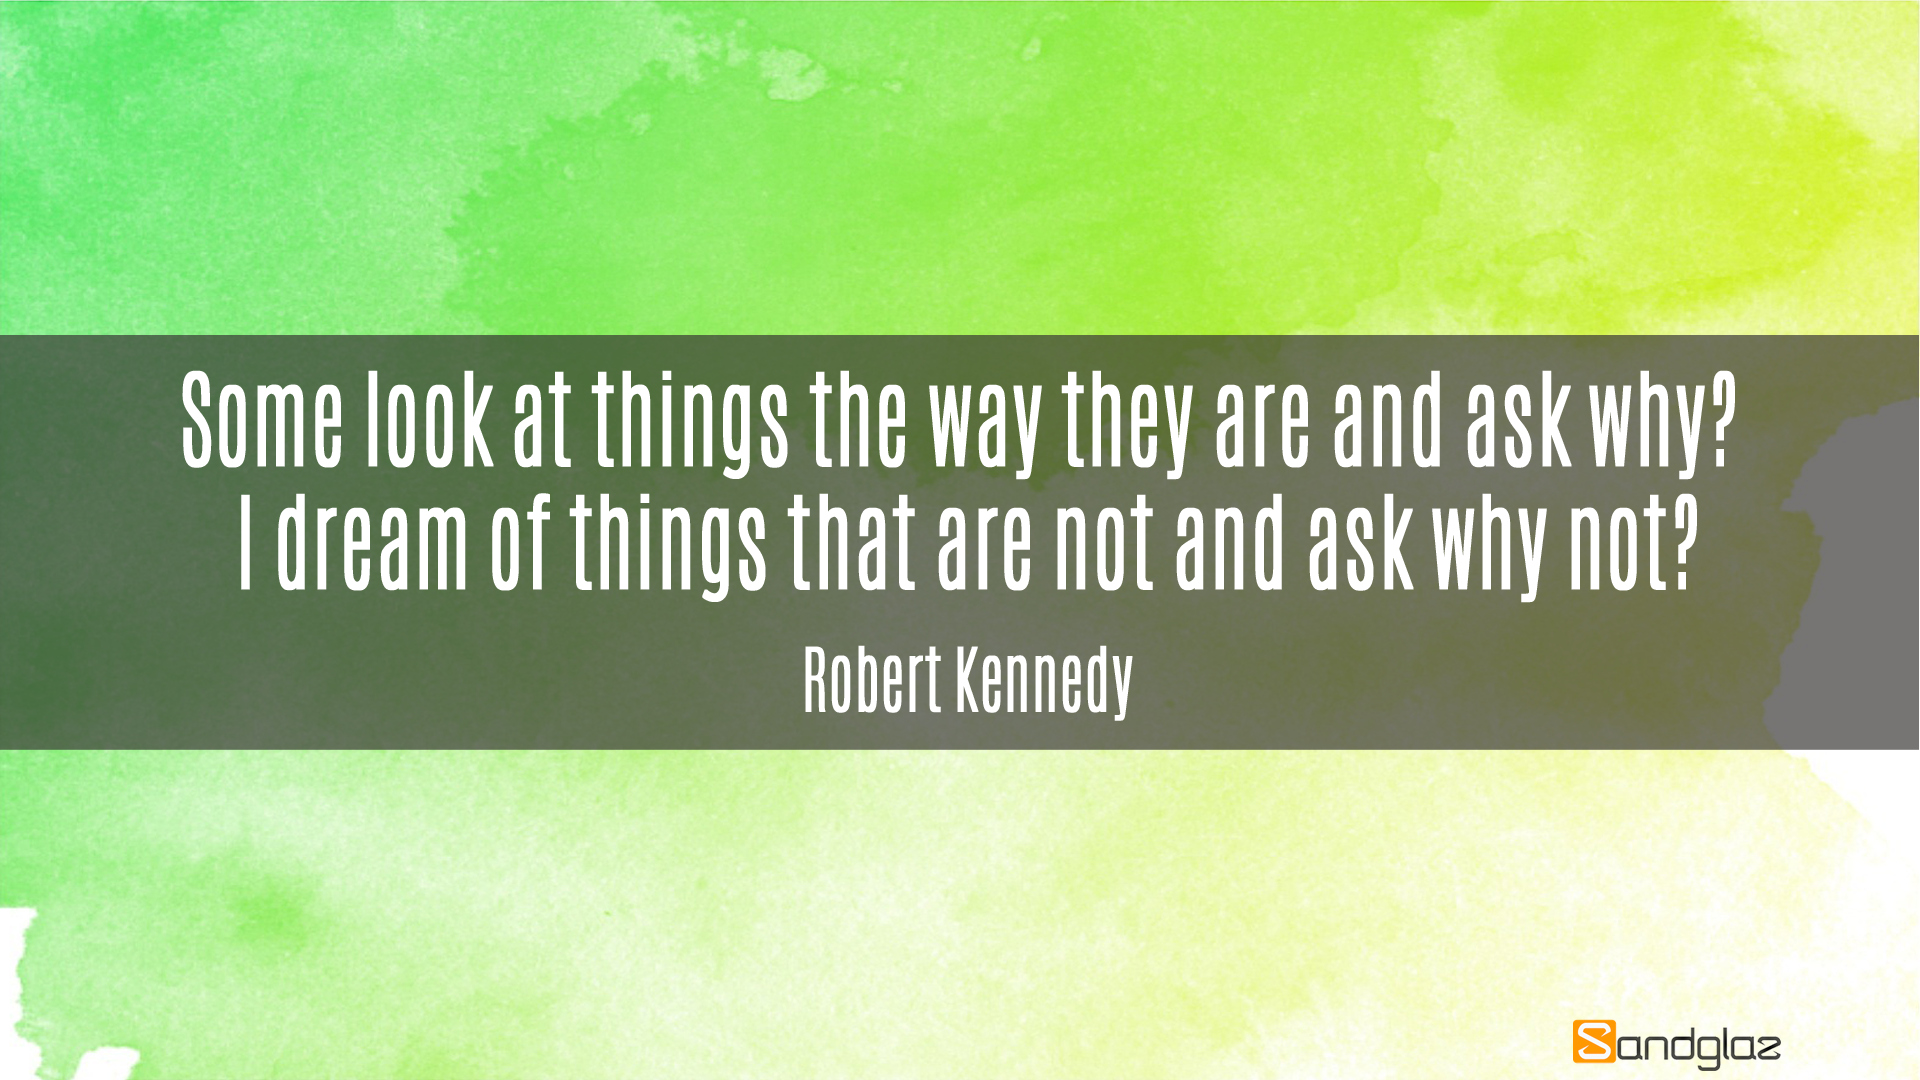 Robert Kennedy Quote Free Wallpaper Download